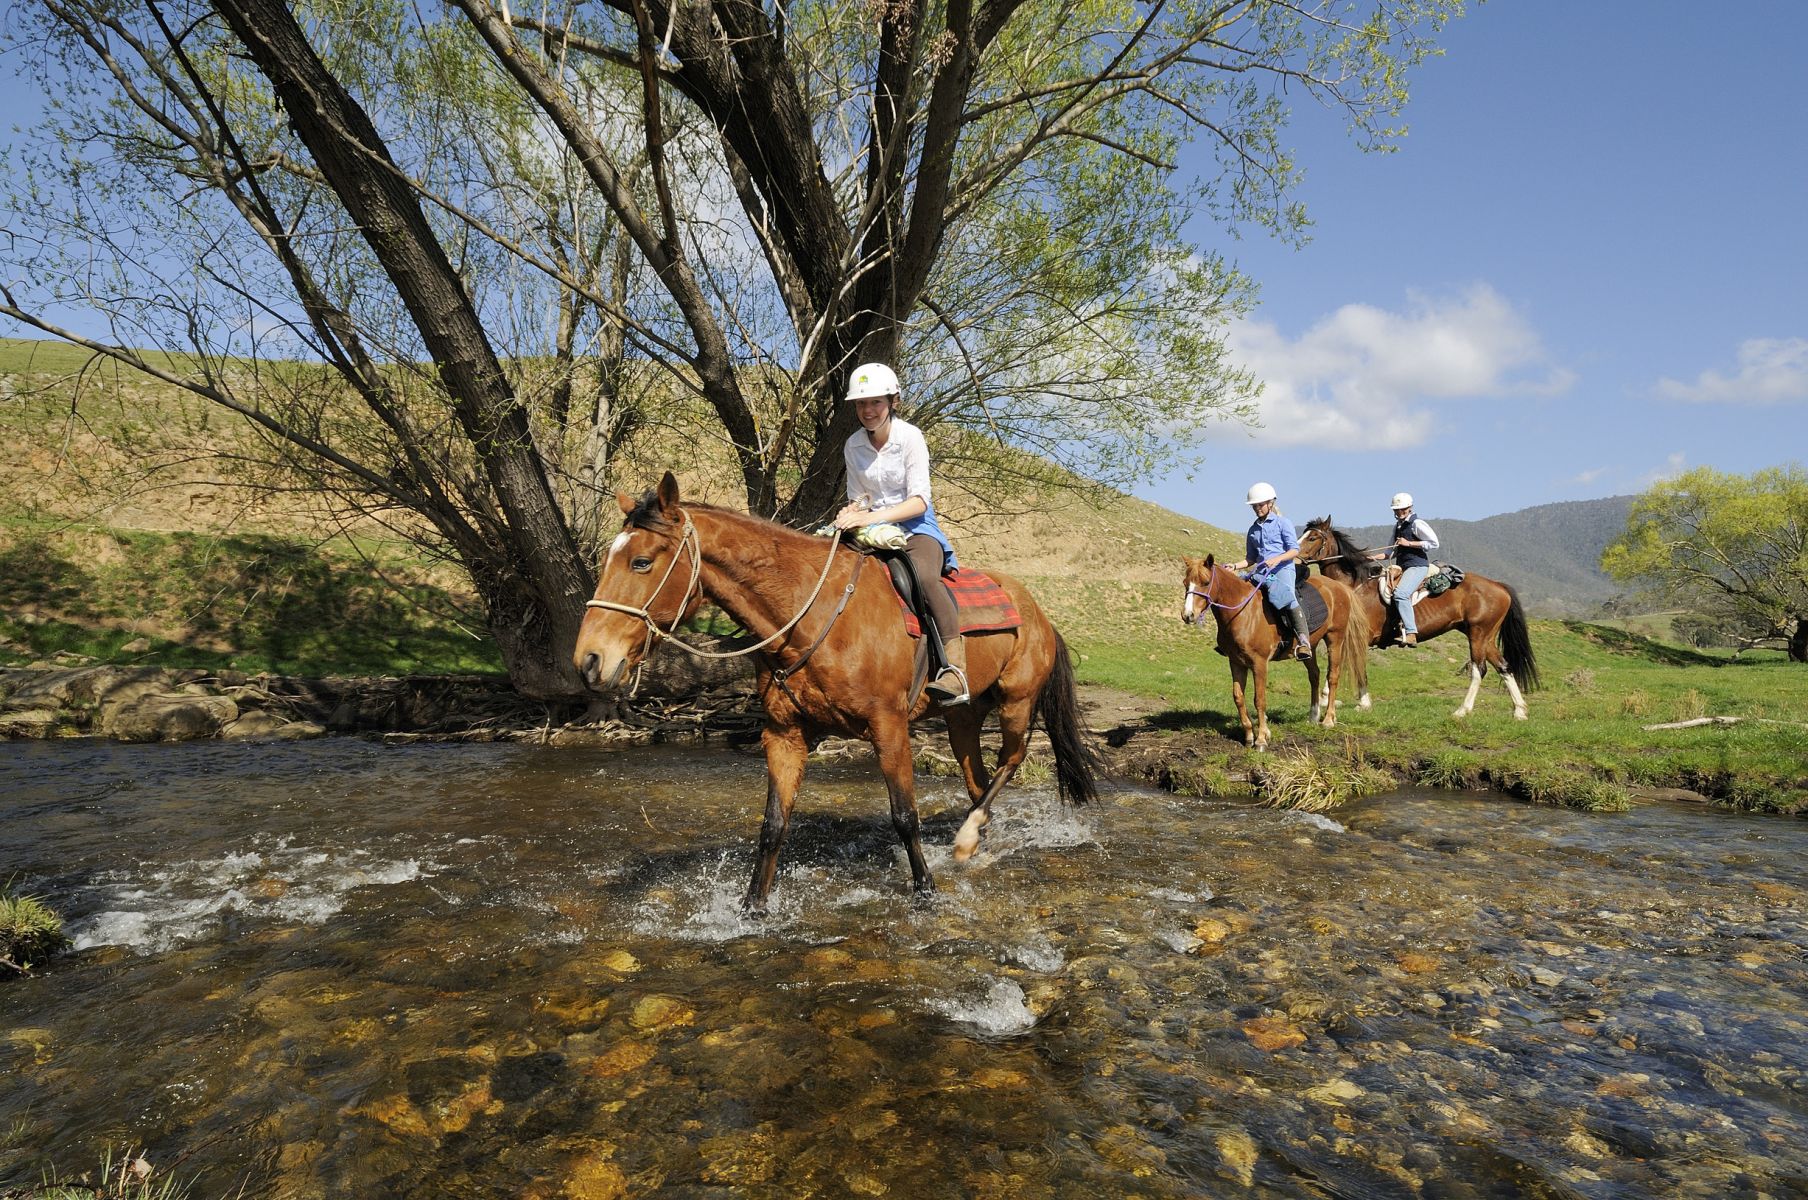 3 people riding horses across a shallow stream